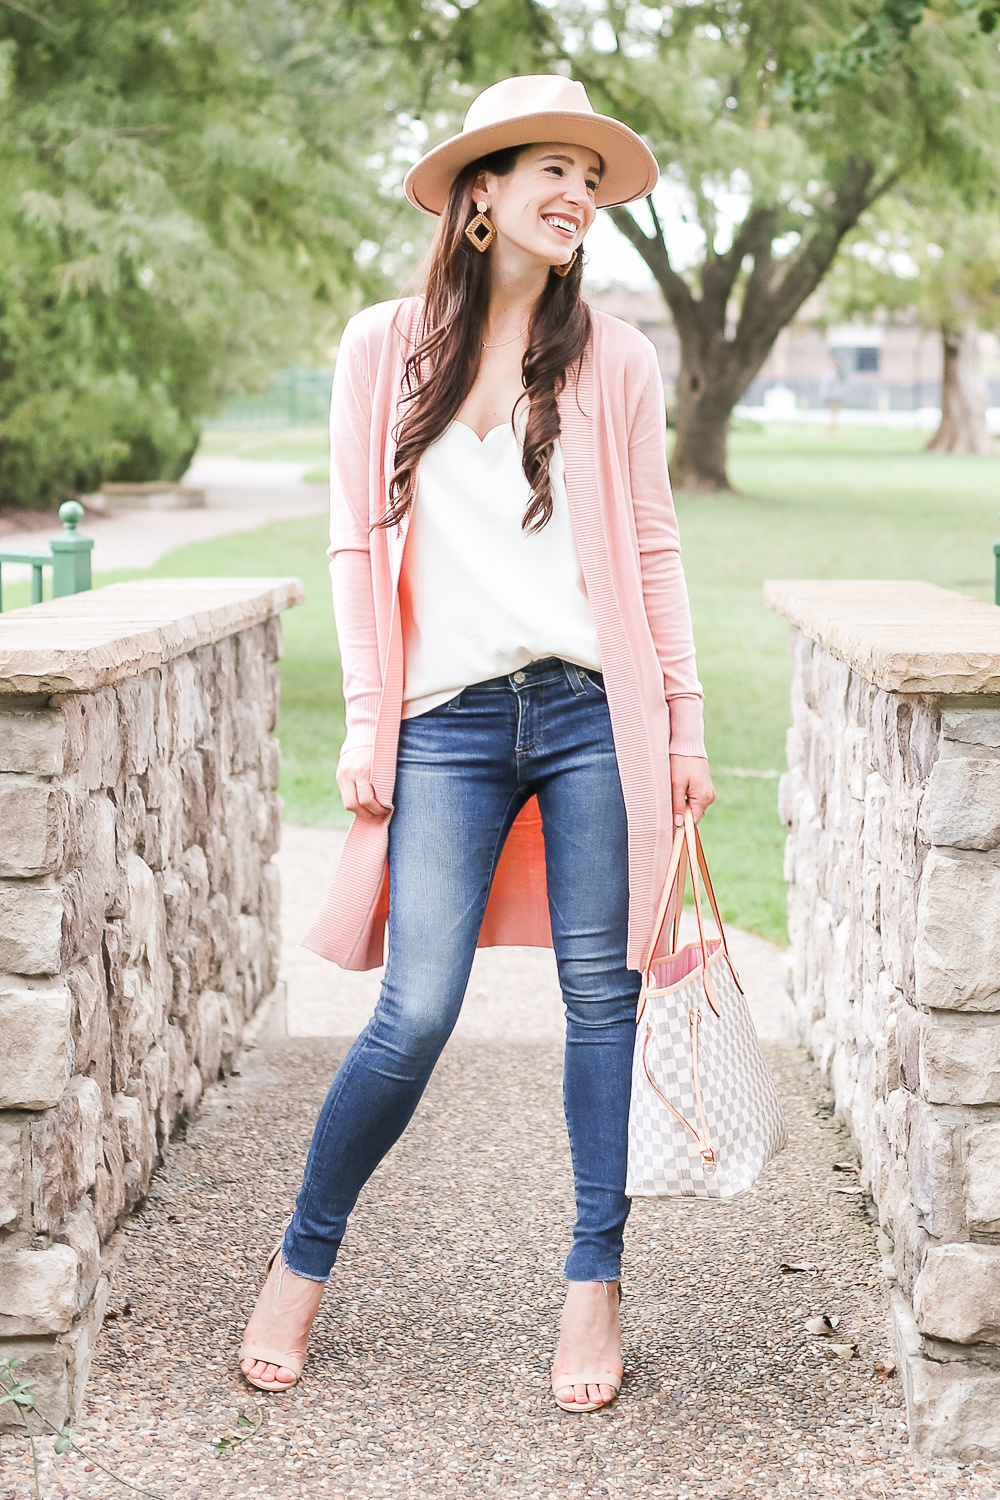 Casual Pink Cardigan Outfit styled by popular affordable fashion style blogger Stephanie Ziajka on Diary of a Debutante, Amazon light pink cardigan styled with J.Crew Factory scalloped cami top, AG the Legging super skinny jeans, Amazon Lanzom wide brim wool fedora hat, Amazon Louis Vuitton Neverfull dupe bag, Amazon nude block heel sandals, Amazon rattan earrings, and Amazon gold circle pendant necklace by Stephanie Ziajka on Diary of a Debutante